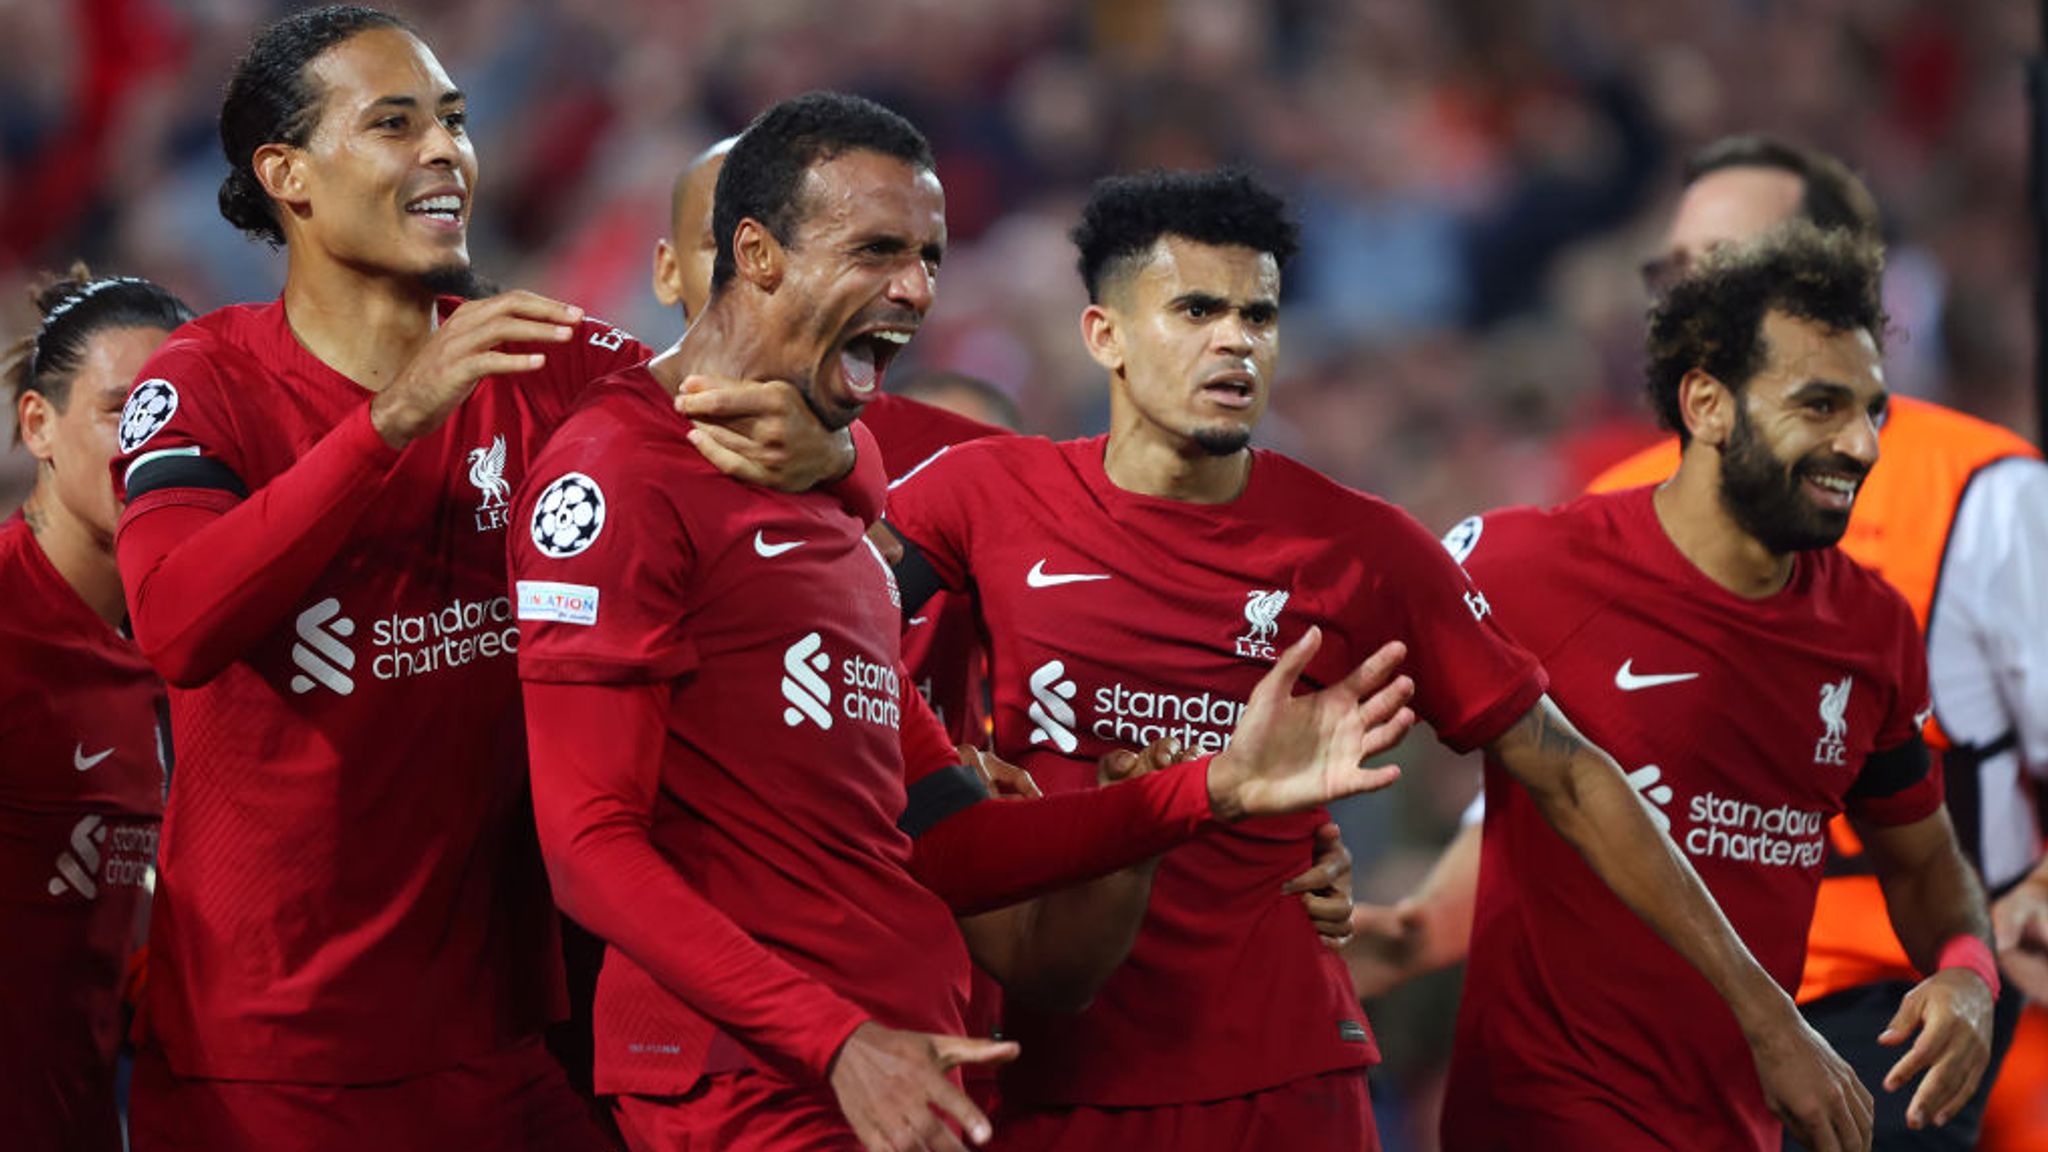 Liverpool 2-1 Ajax Joel Matips header dramatically secures Champions League points for Reds late on Football News Sky Sports